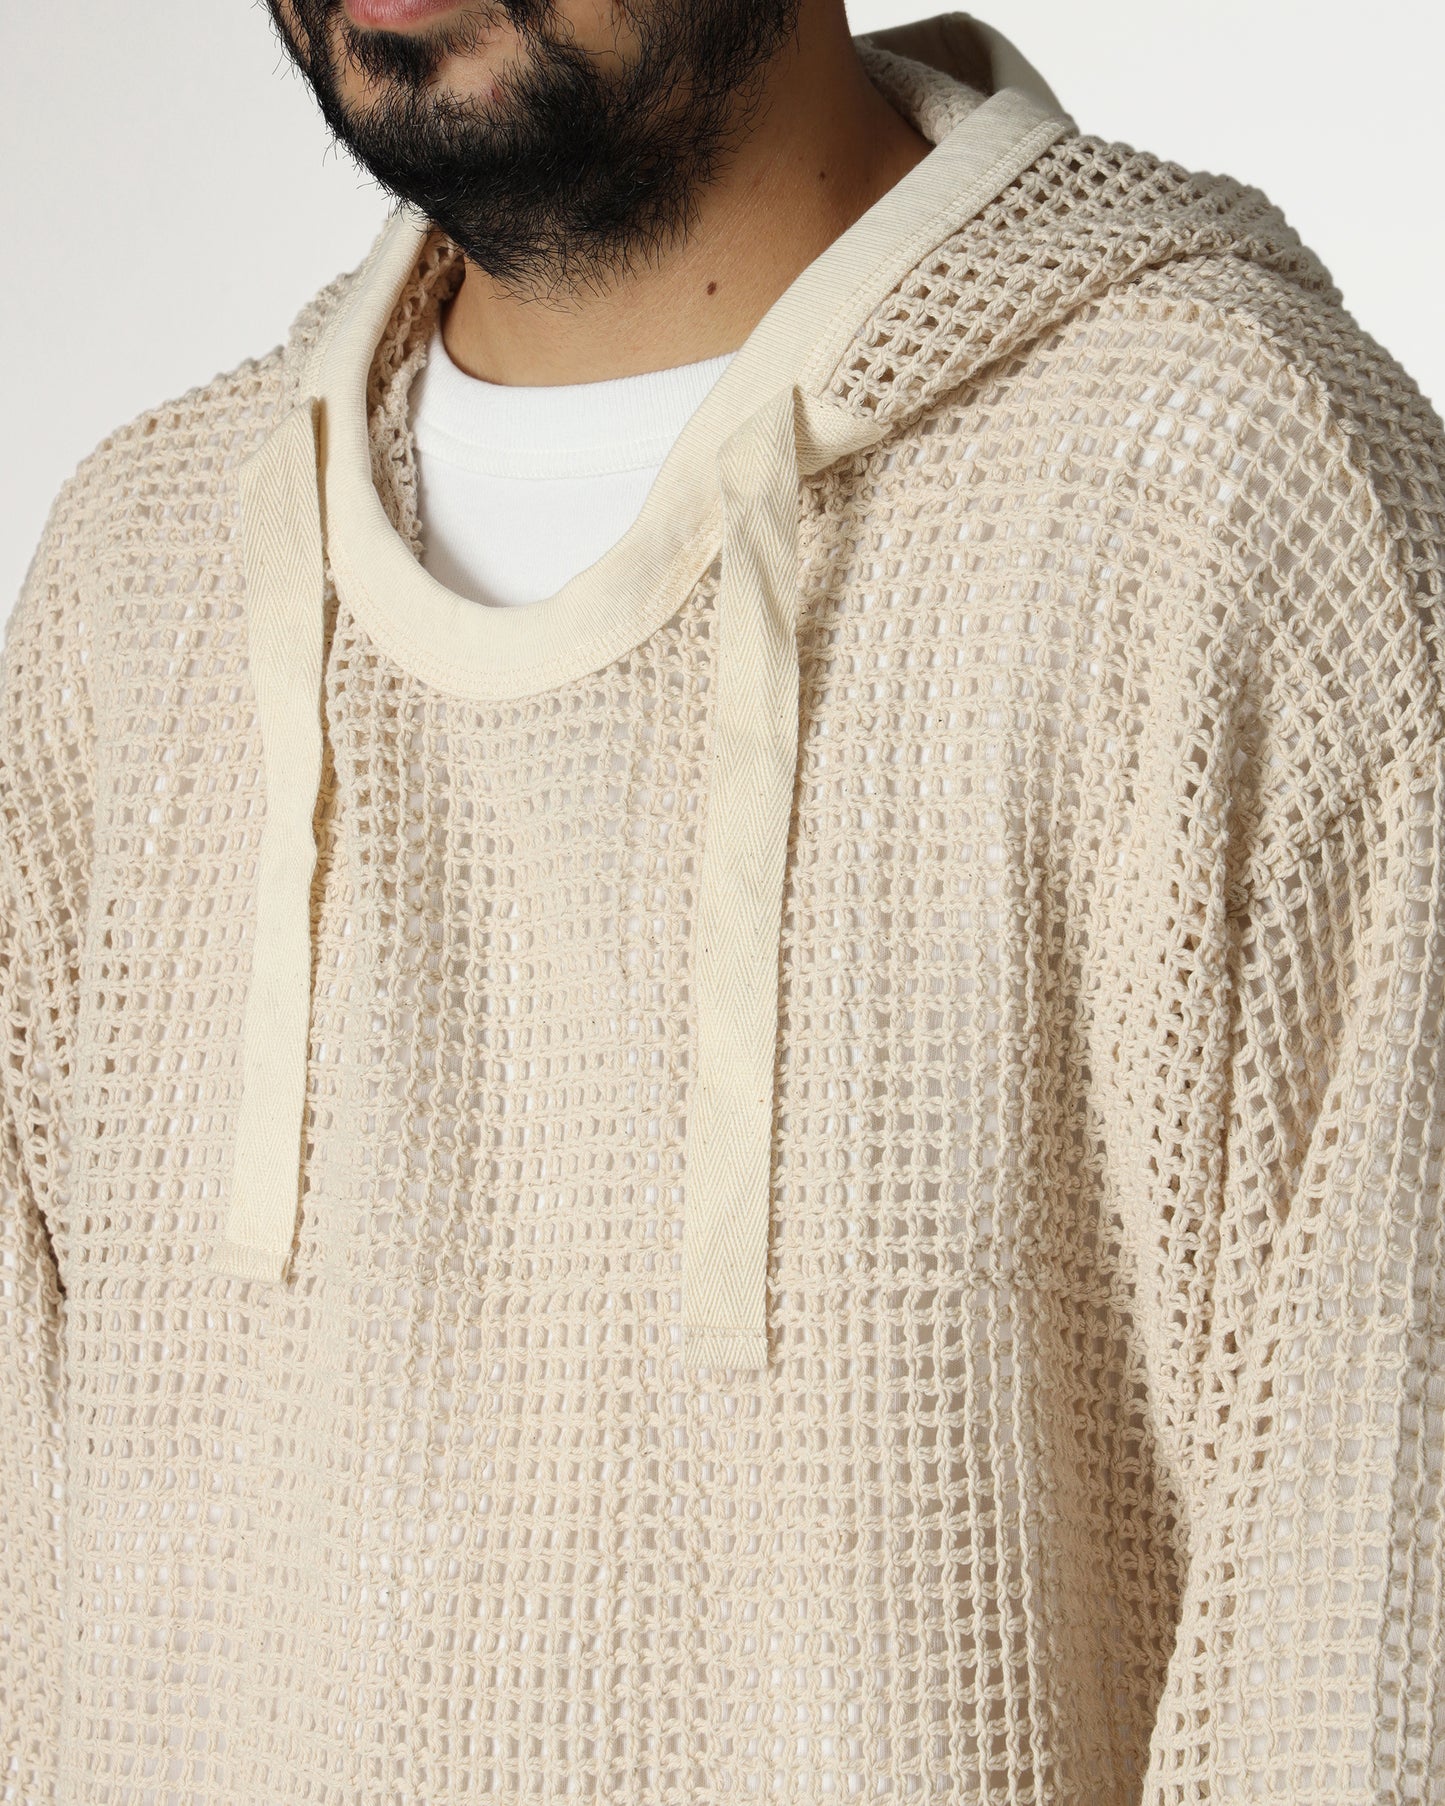 Cotton Embroidery Mesh 3/4 sleeve Hoodie